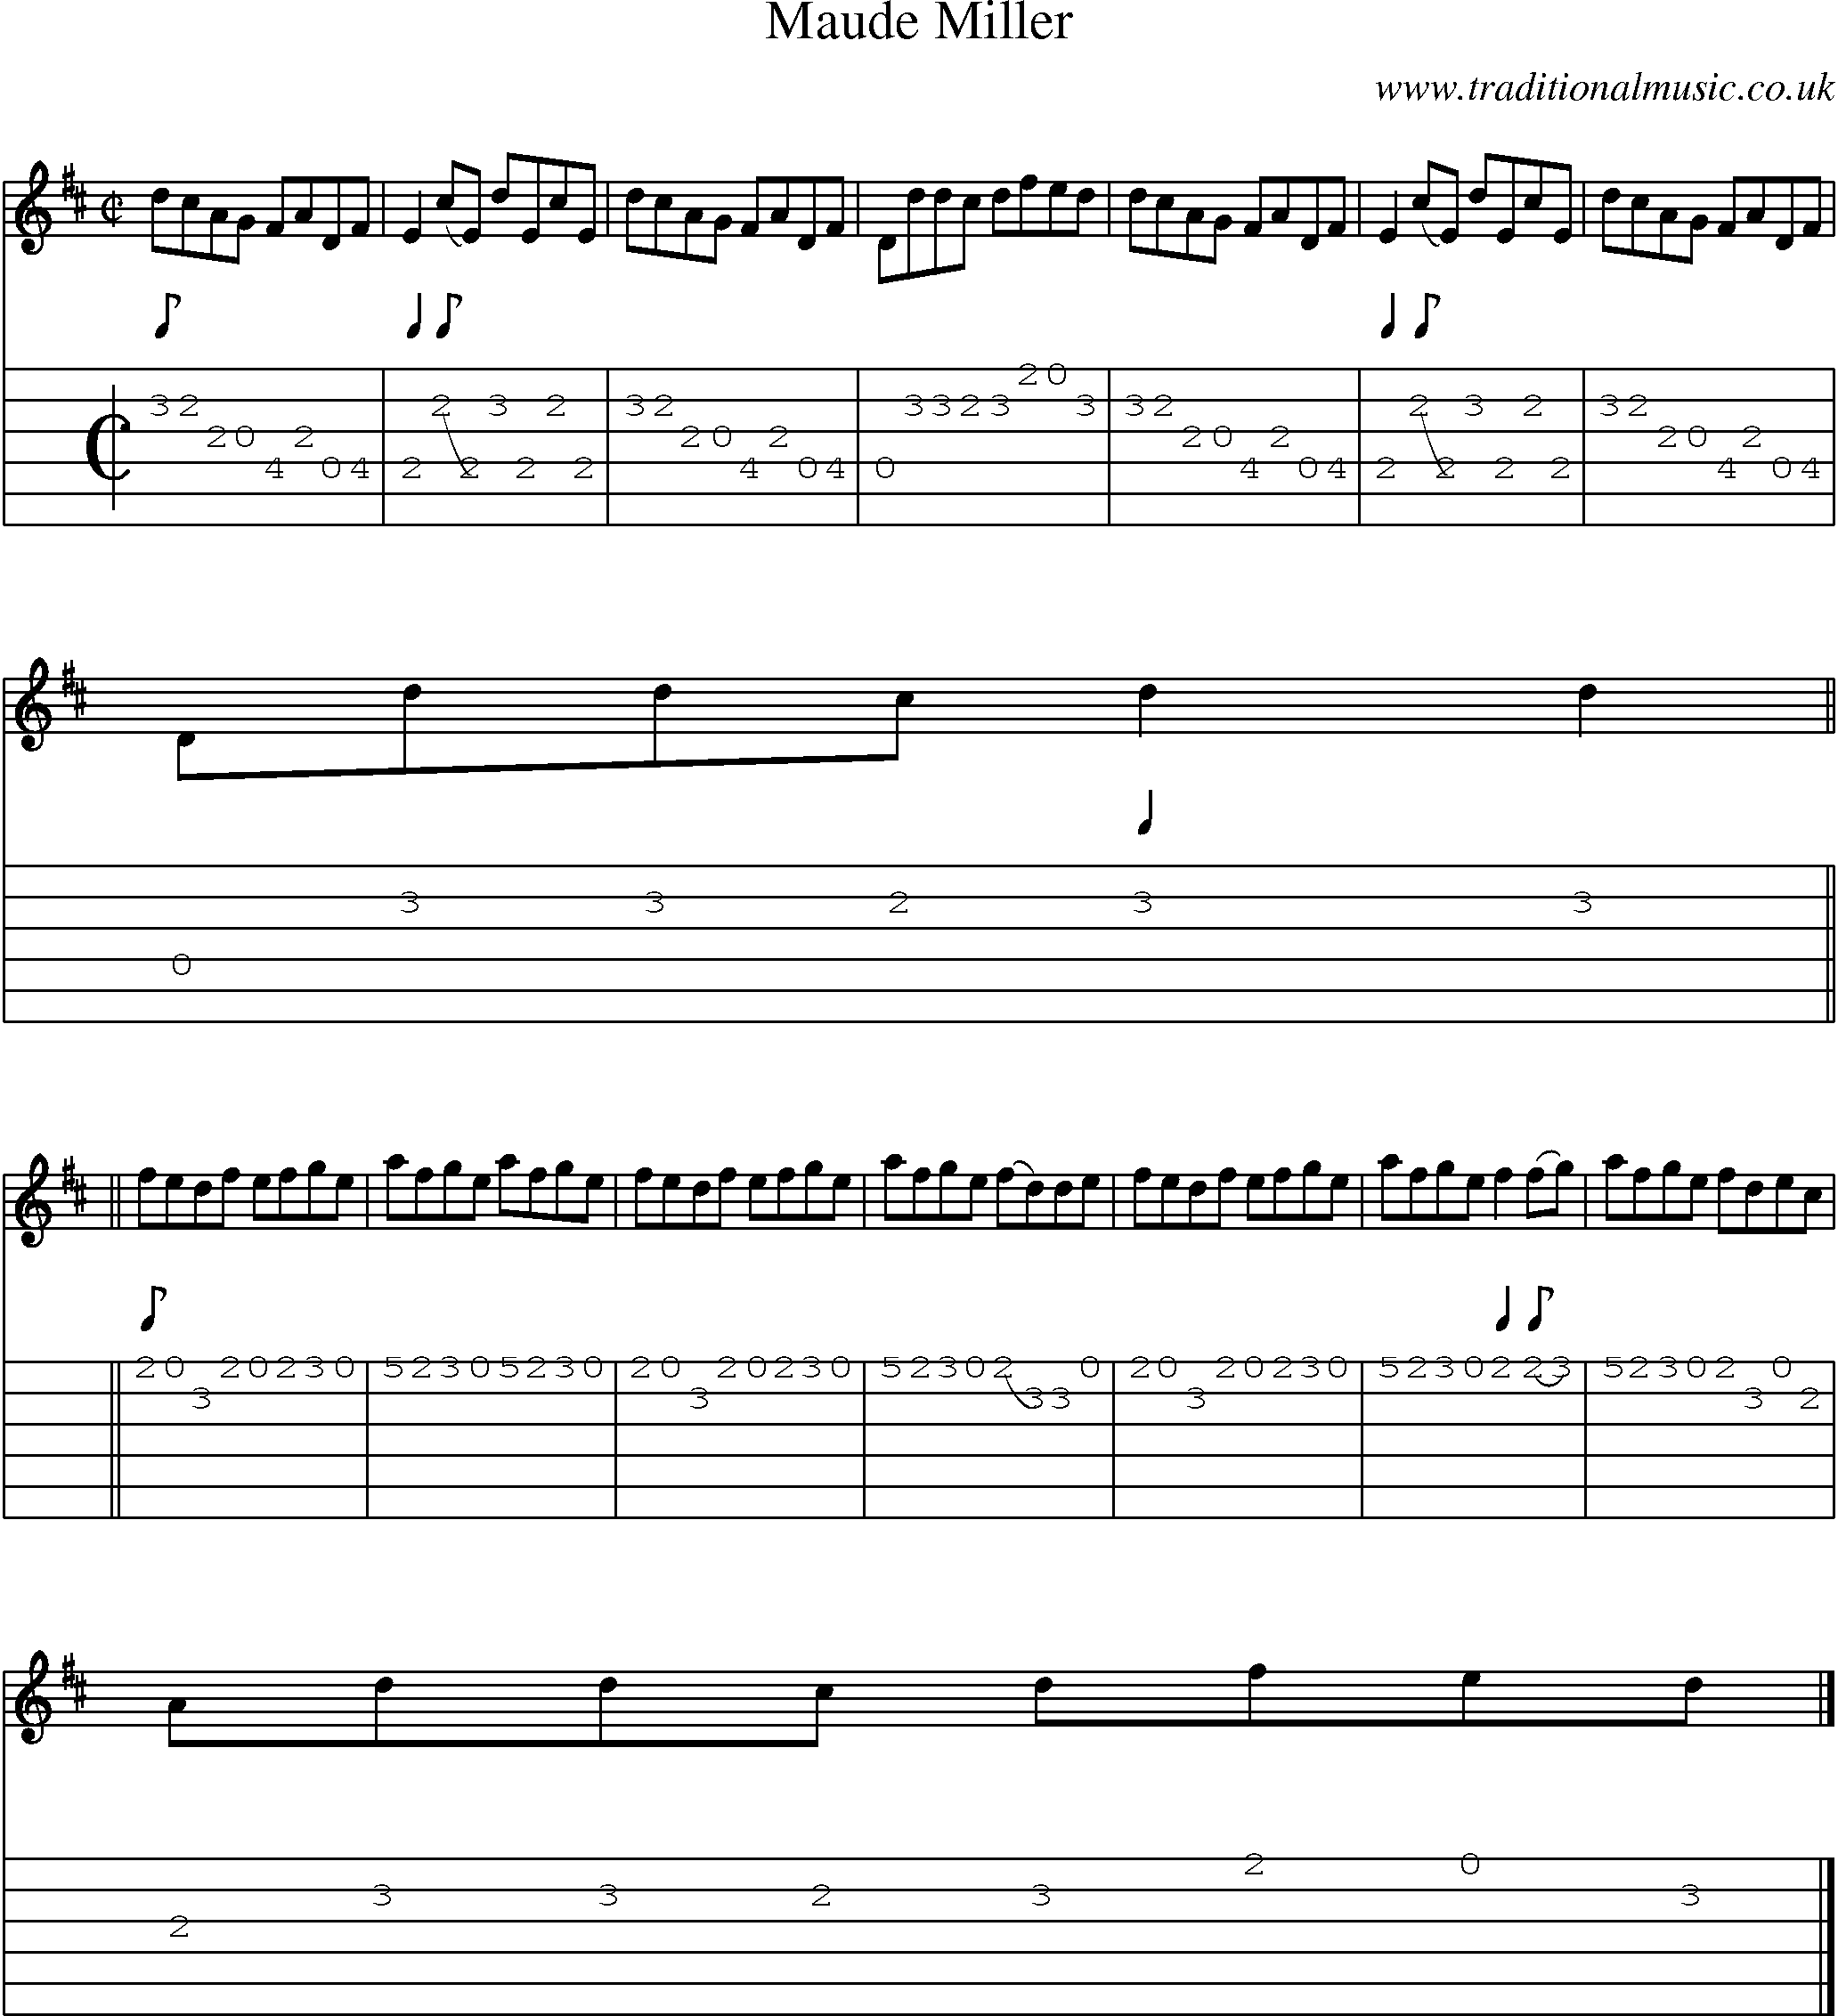 Music Score and Guitar Tabs for Maude Miller